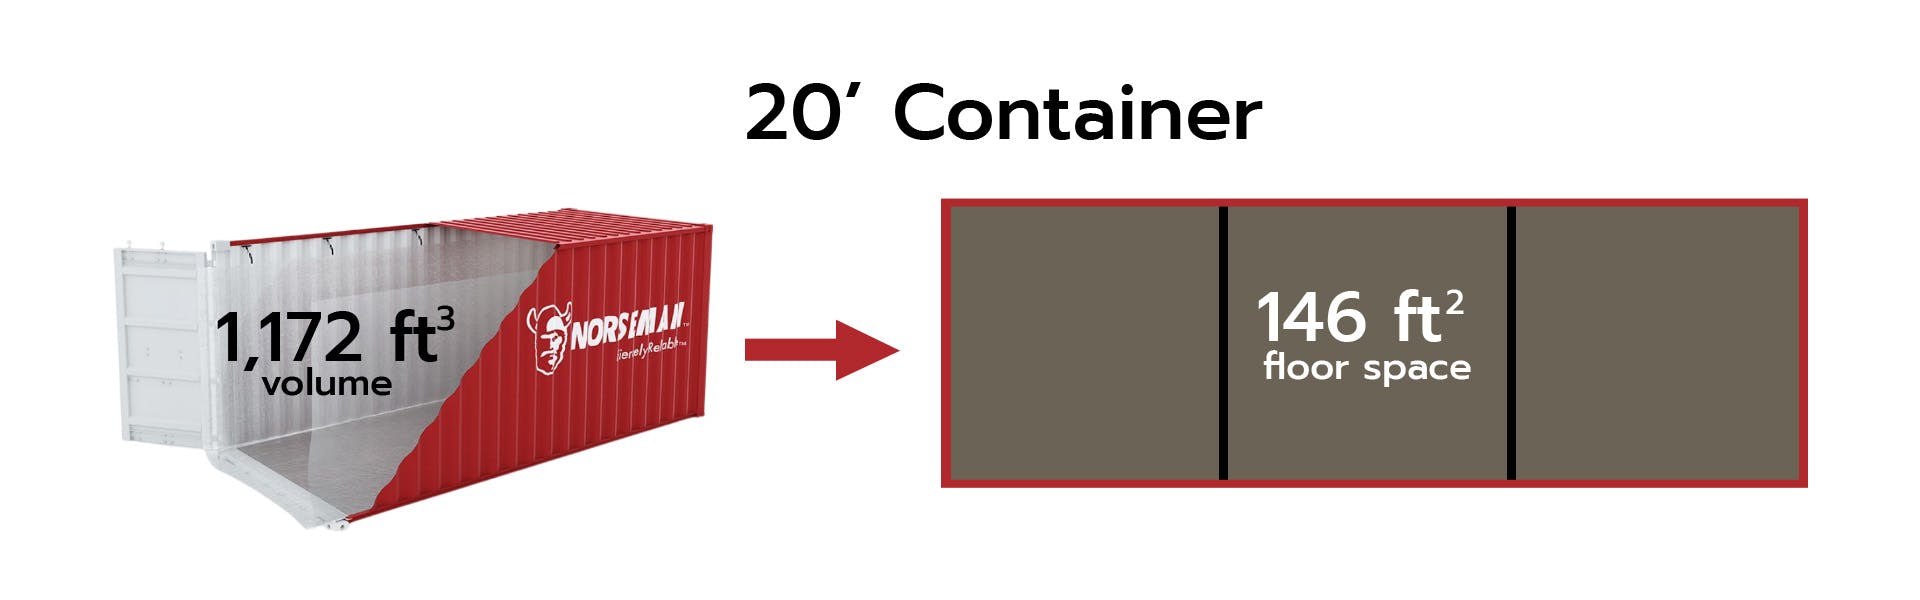 container space measurements article containerized shipping solutions